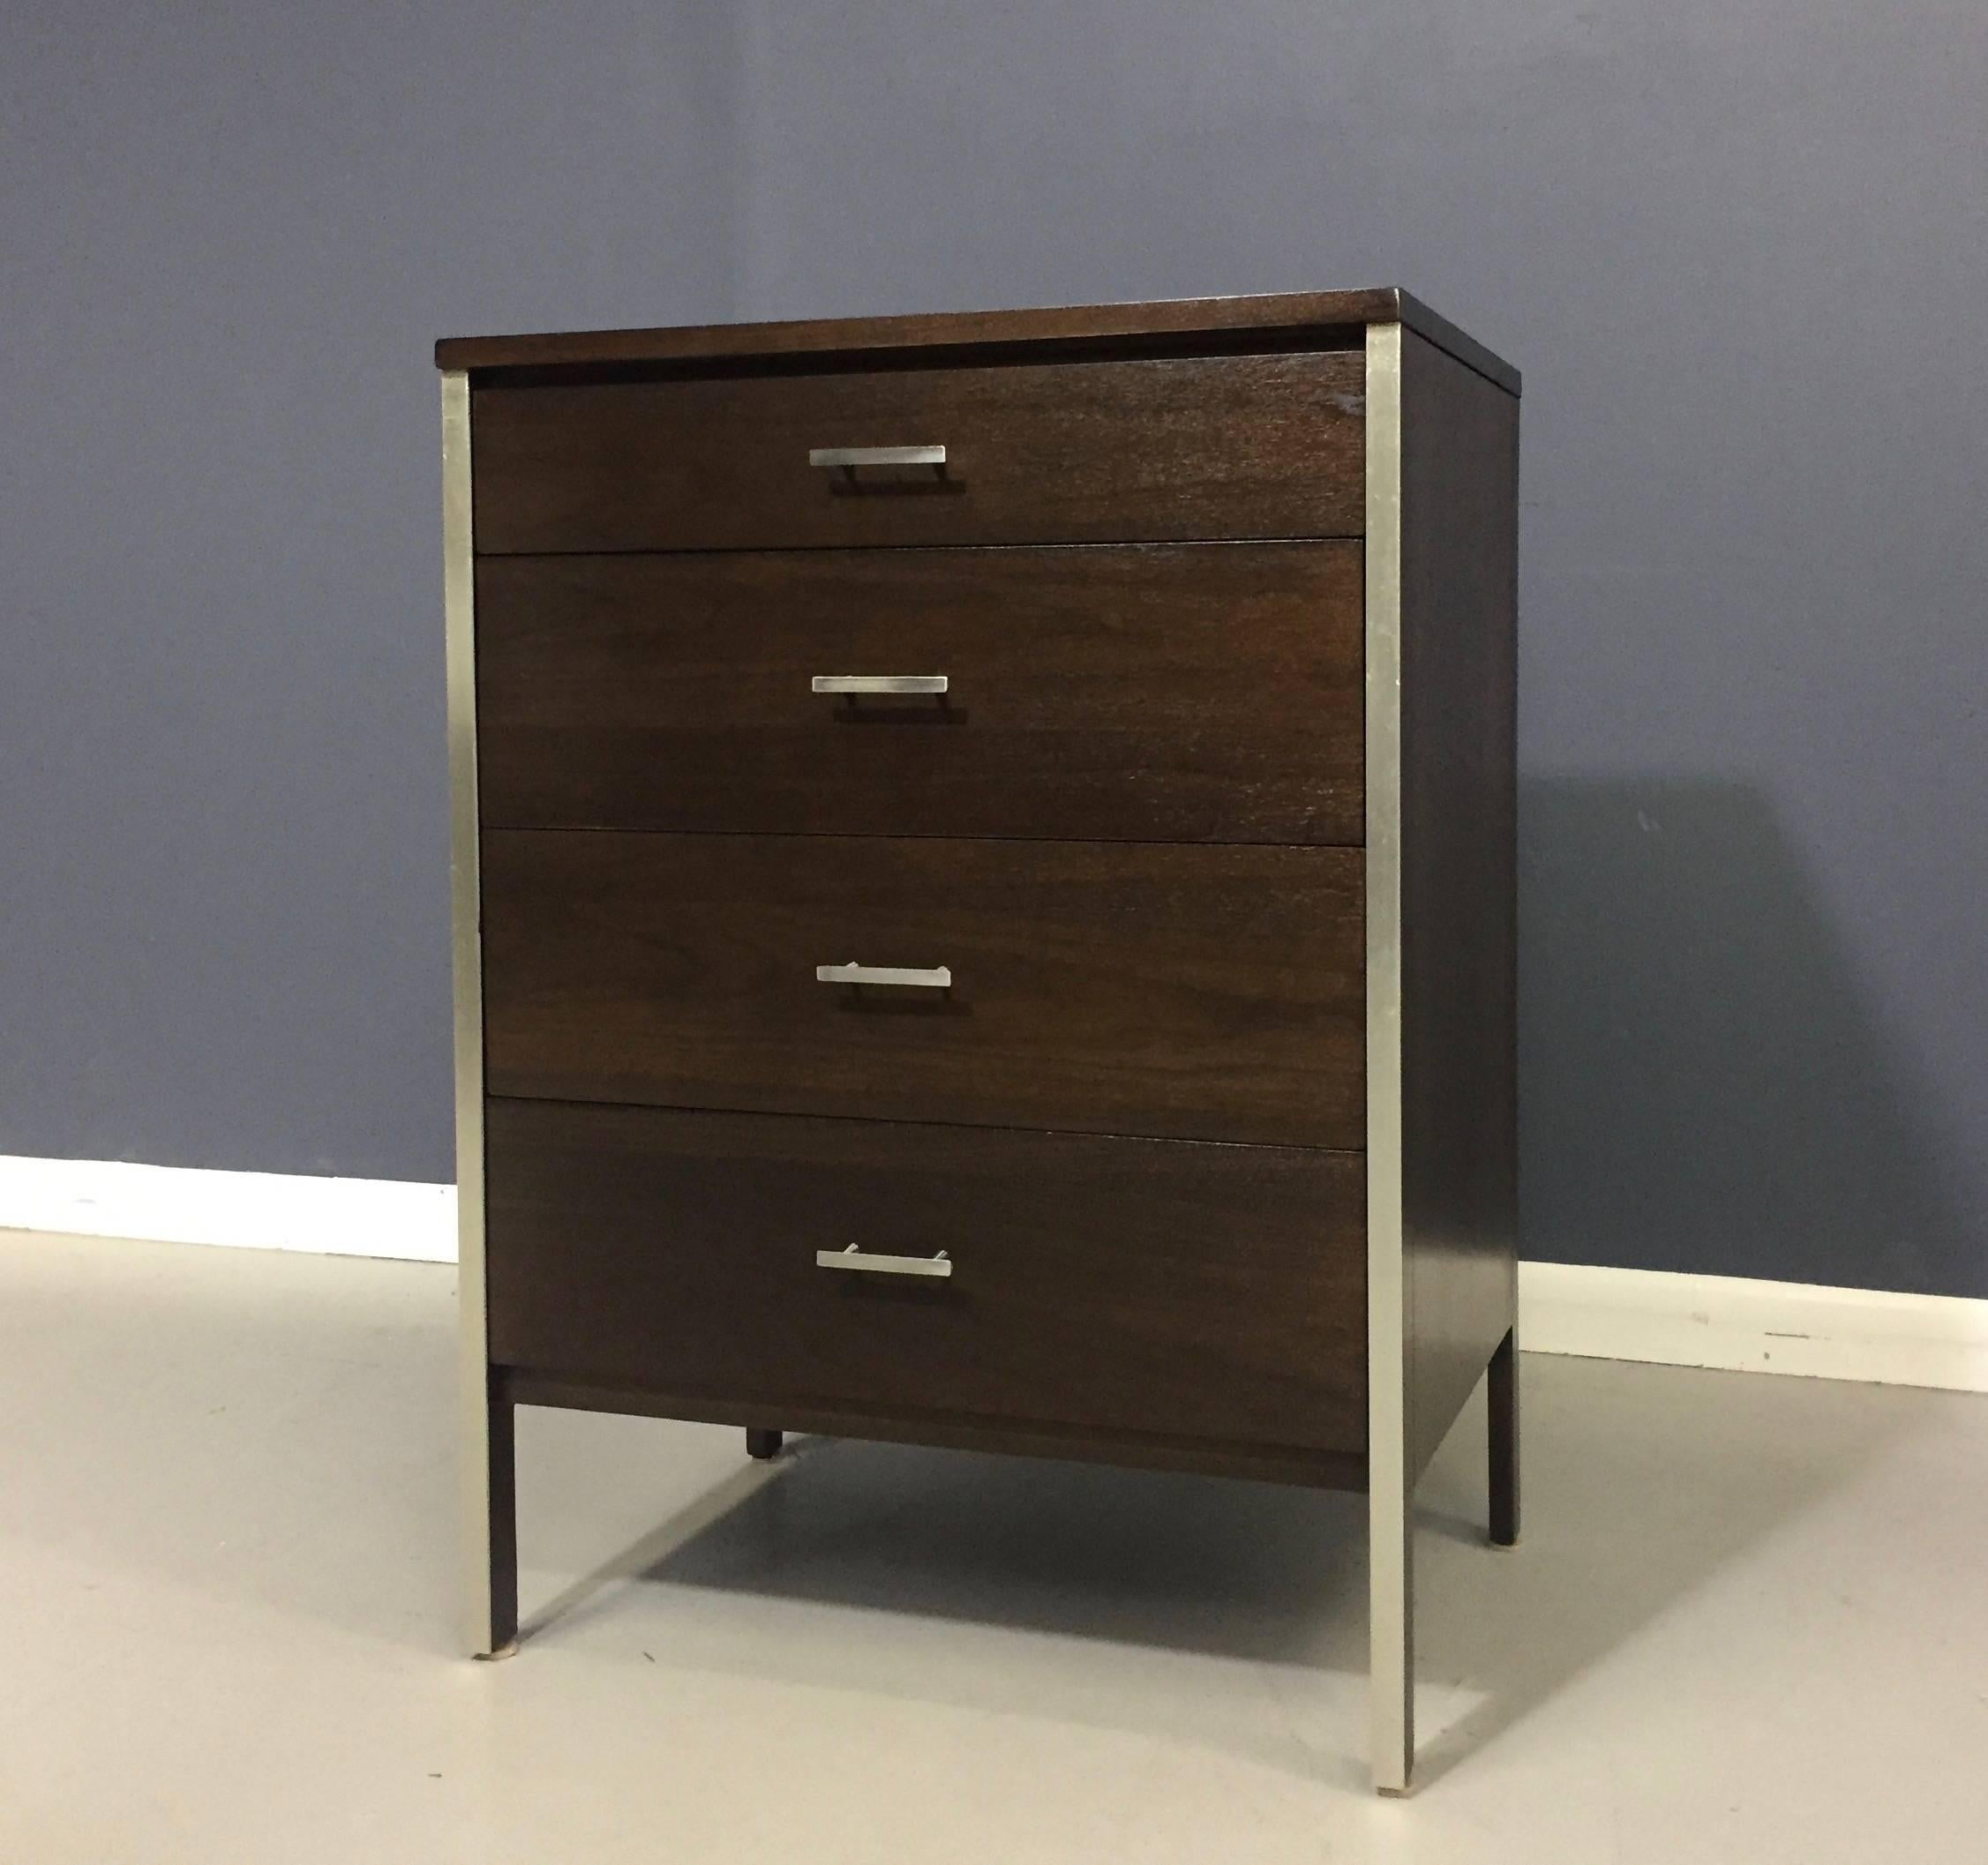 Paul McCobb designed chest for Calvin this petite four drawer chest is perfect for that Manhattan apartment! Totally refinished in dark walnut with original aluminium pulls and trim.

Paul McCobb worked in the same period as other illustrious